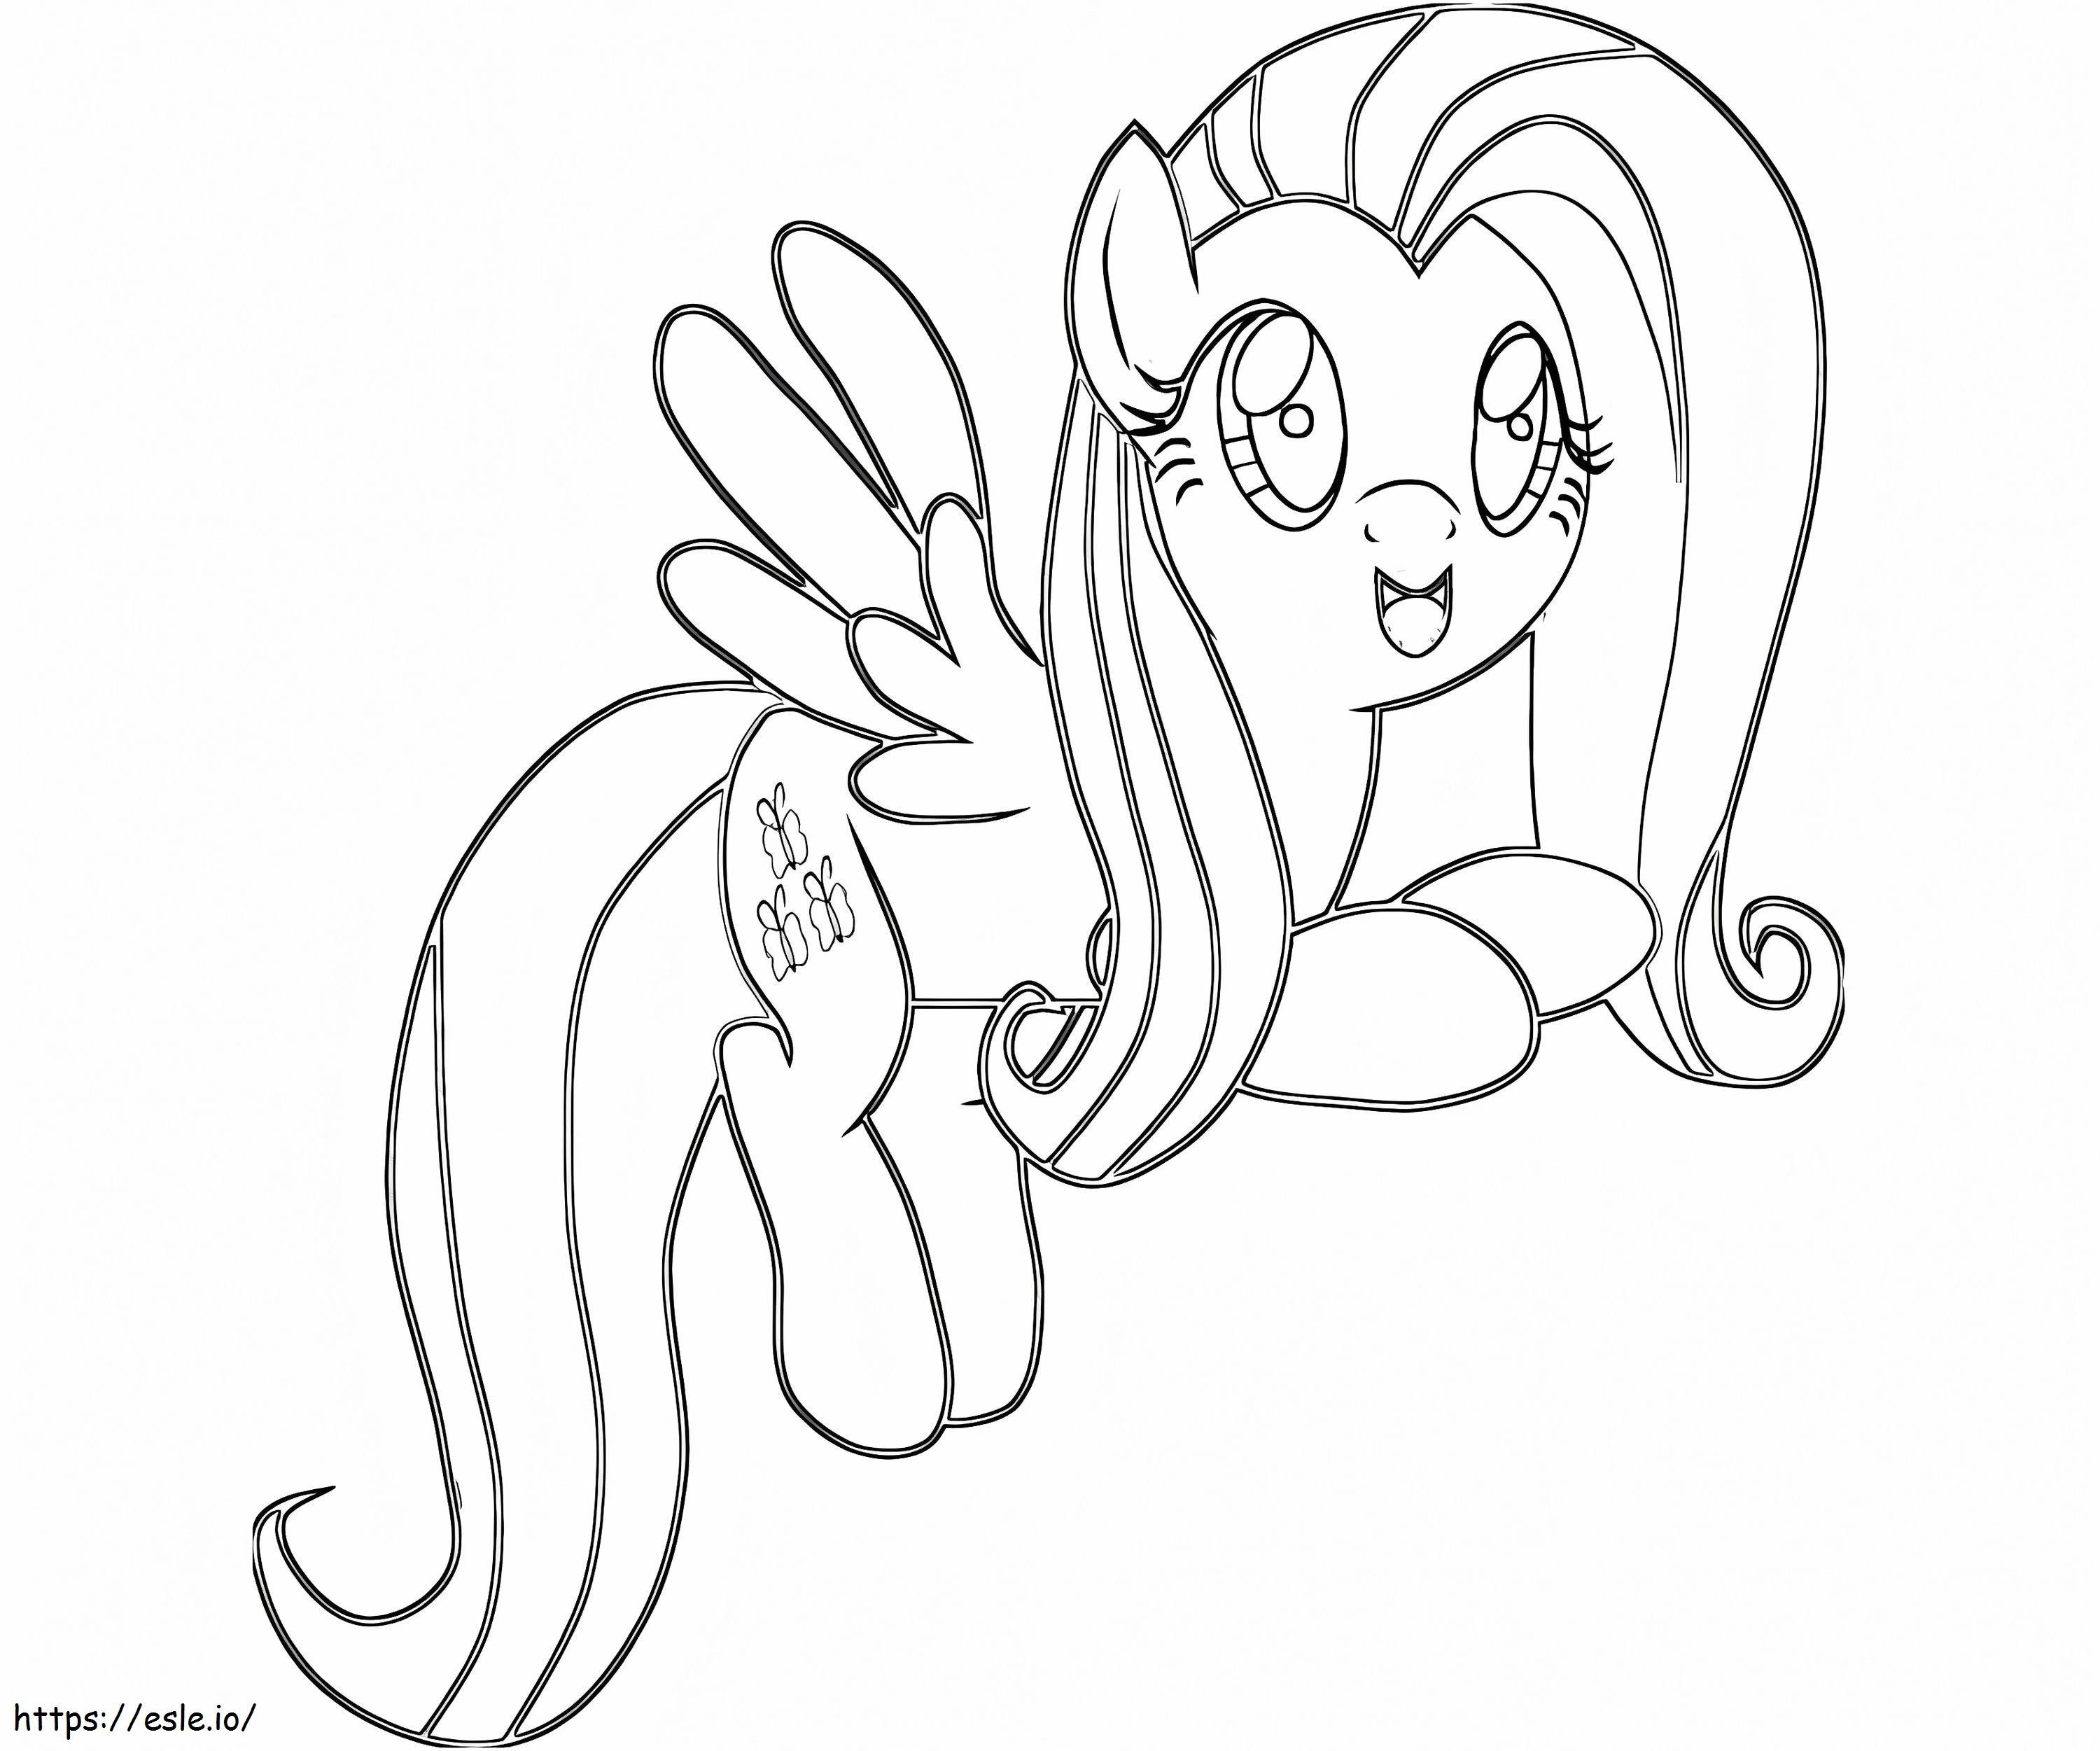 Pony Fluttershy 3 coloring page